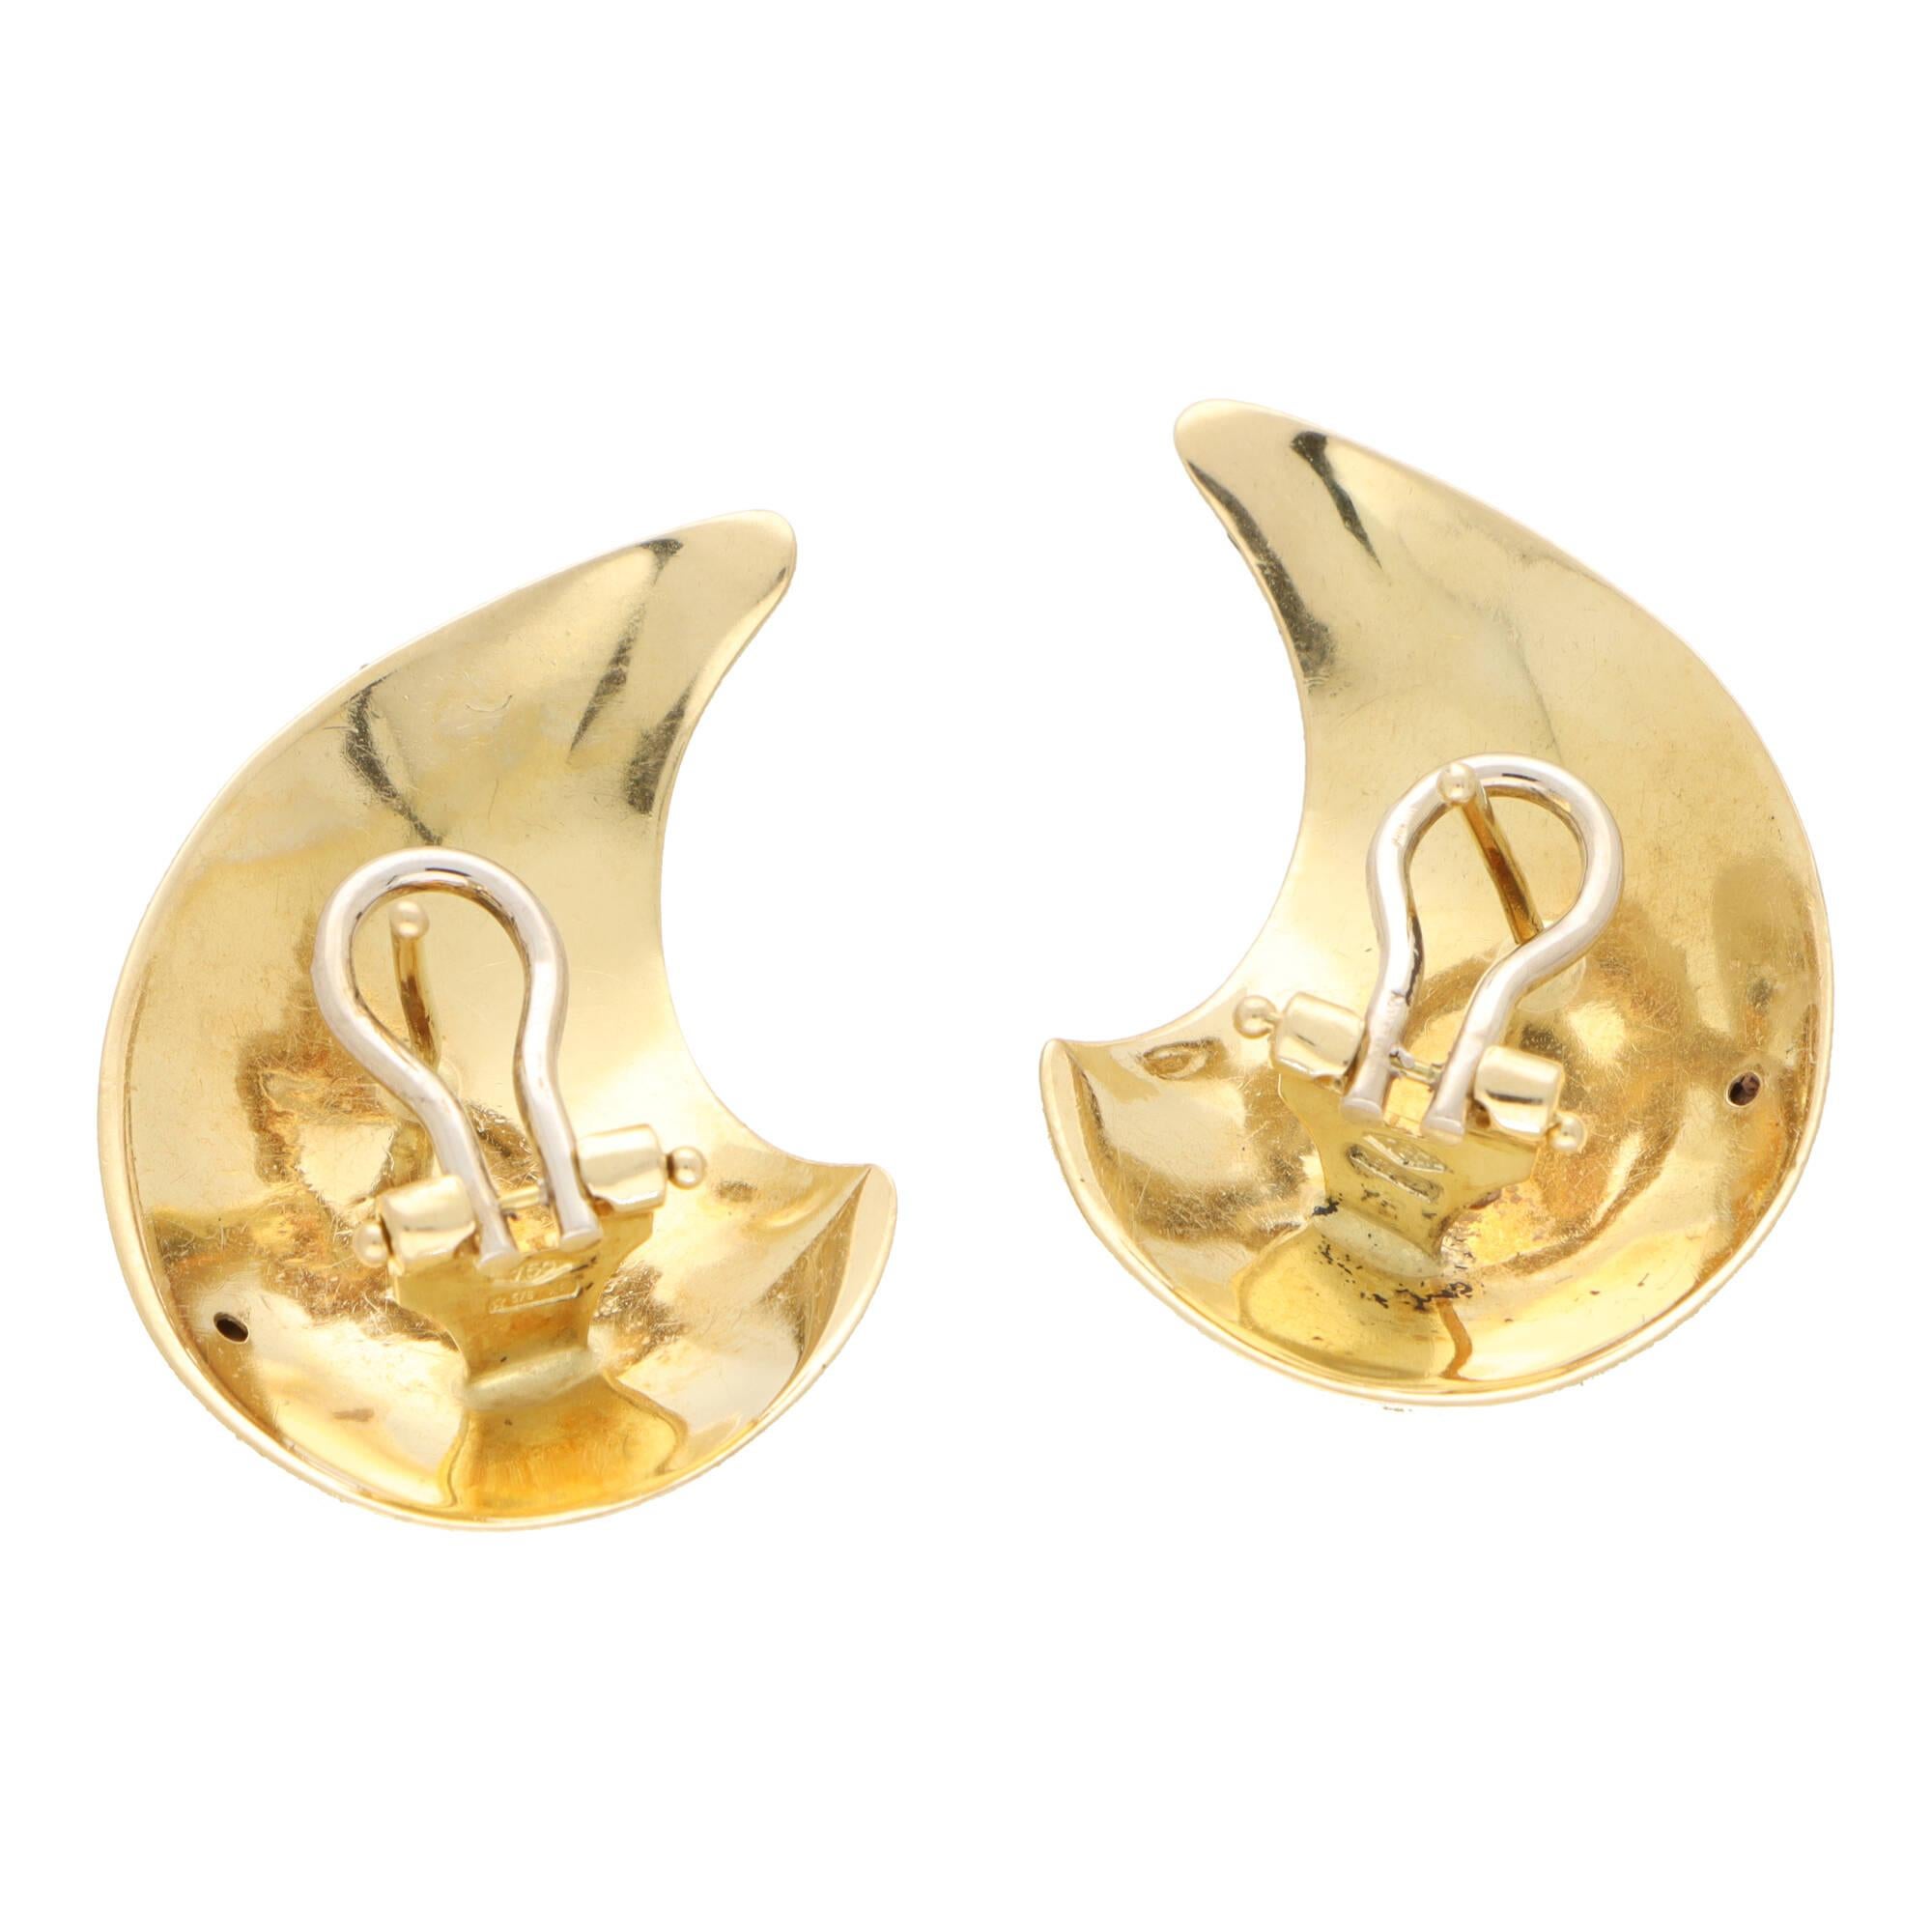 Vintage 1980's Curved Earrings Set in 18k Yellow Gold In Excellent Condition For Sale In London, GB